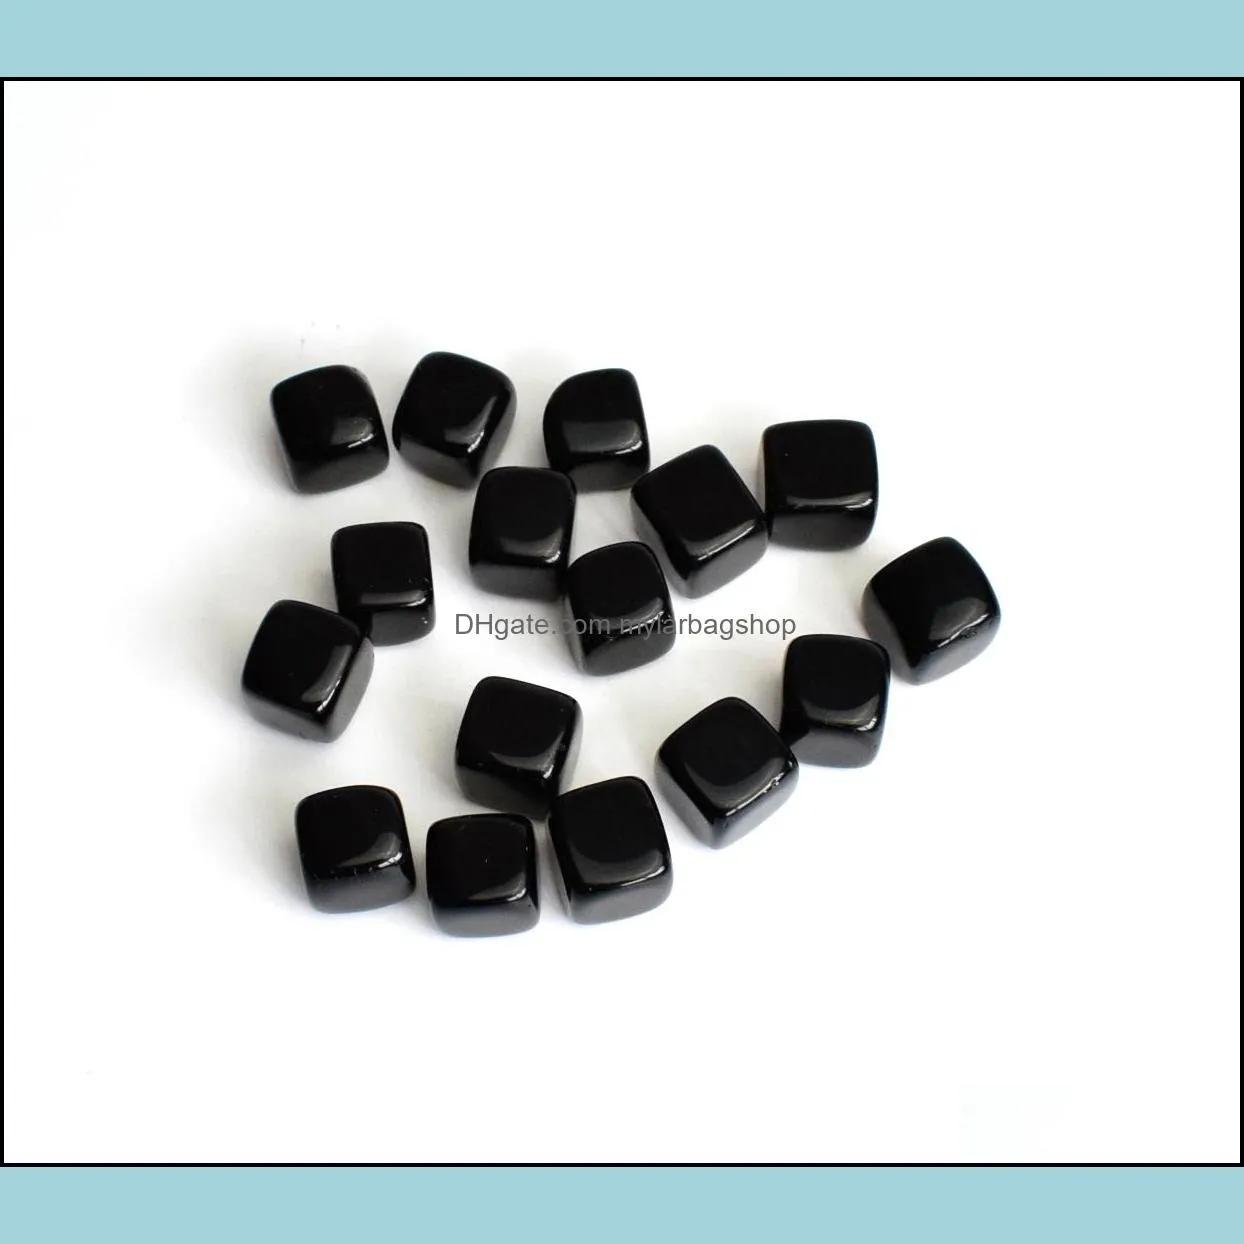 12 lb bulk natural tumbled black obsidian carved cube crystal reiki healing semiprecious stones with a free pouch